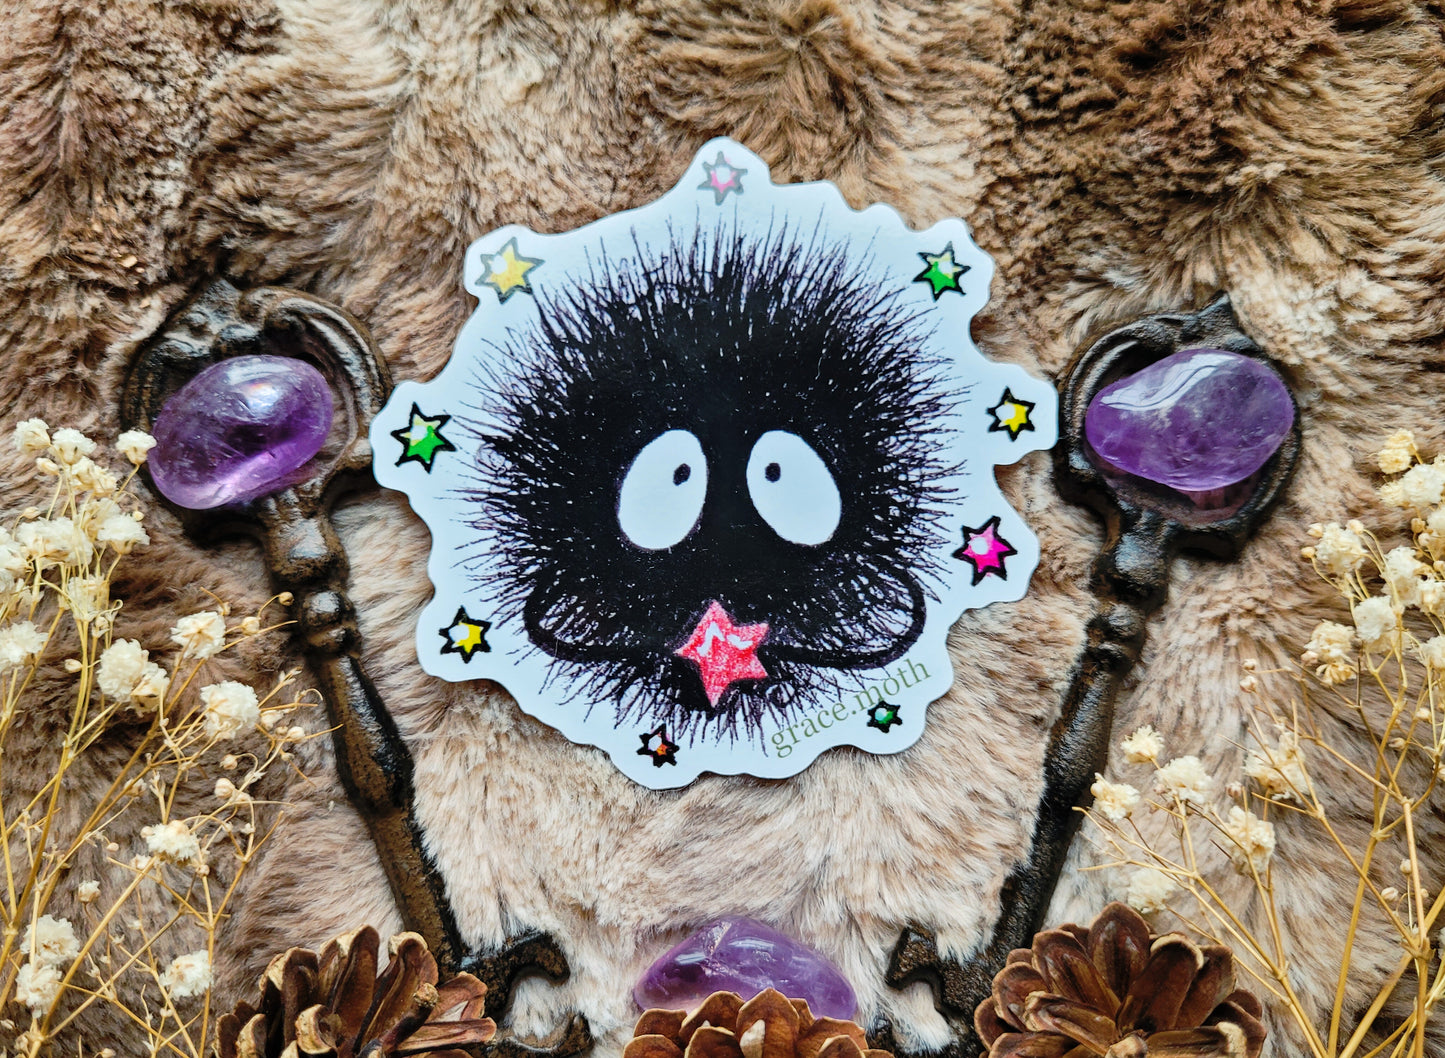 Soot Sprite spirit - Vinyl Sticker 10cm - Japanese Anime inspired art - Witchy - Gothic - Illustrated by Grace moth